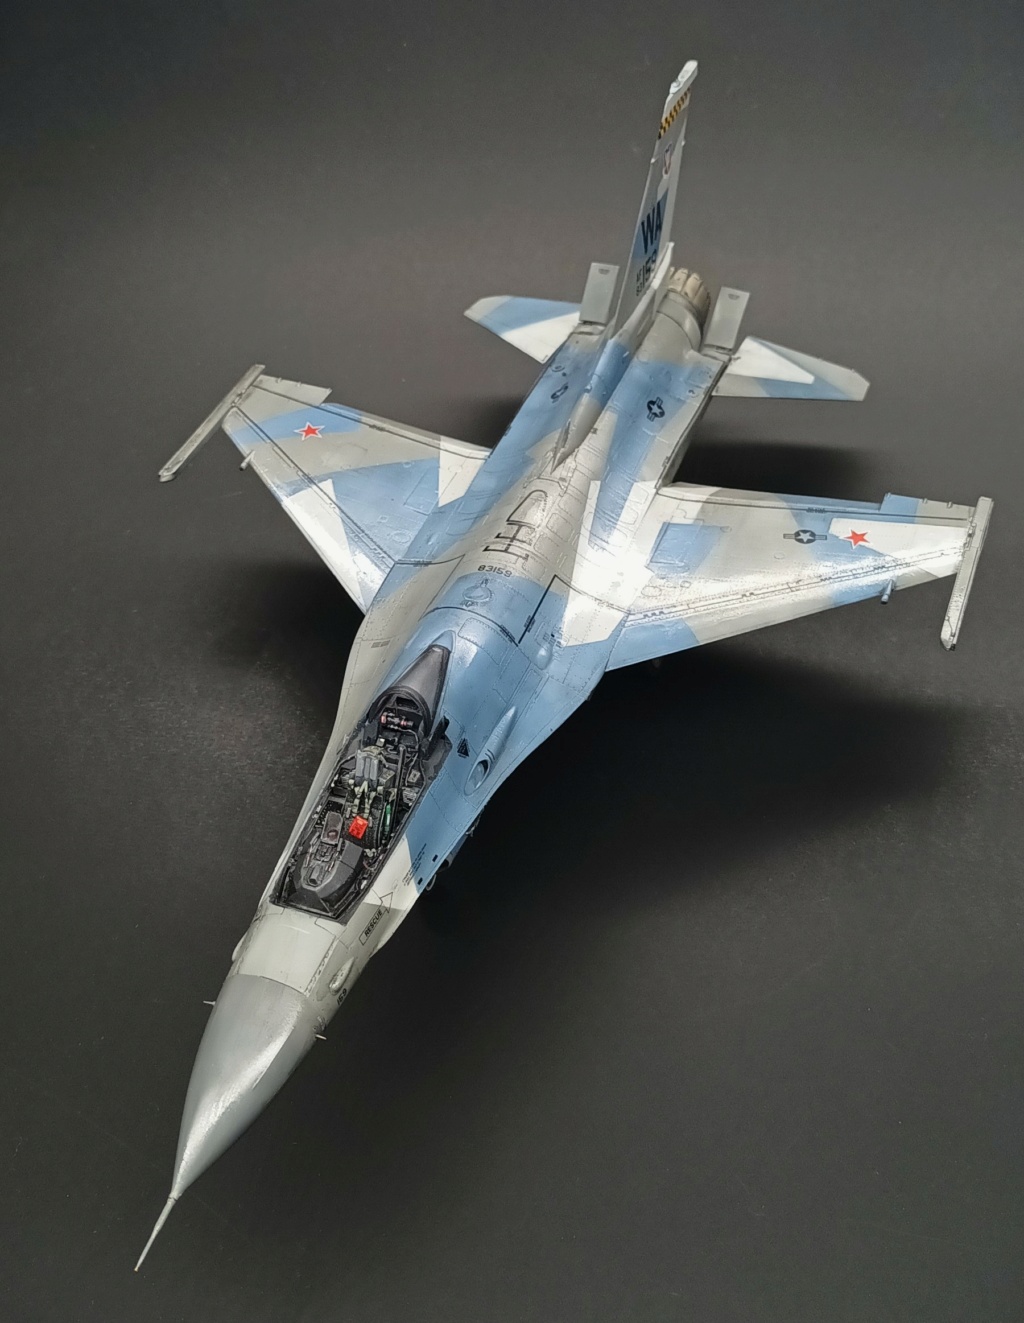 [Kinetic] 1/48  - McDonnell F/A-18A+ Hornet- VFC 12   / Double  [Tamiya] General Dynamics F-16C Fighting Falcon - 64th AGRS  1/48  - Aggressor - Page 4 20240226